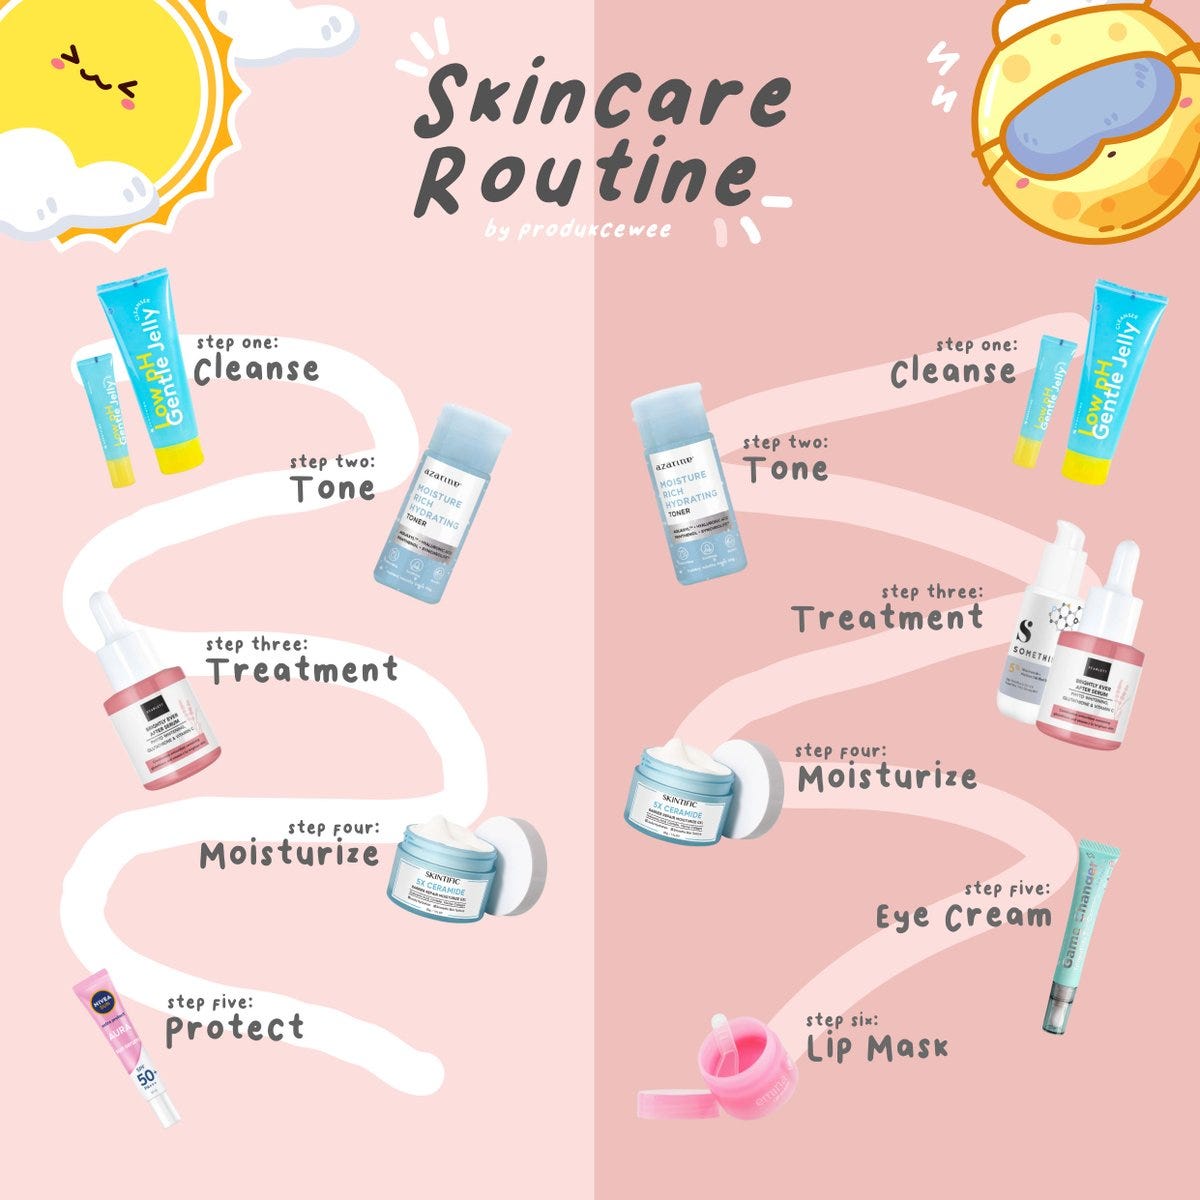 23 Quick Self Care Routine Shower Steps for Glowing Skin